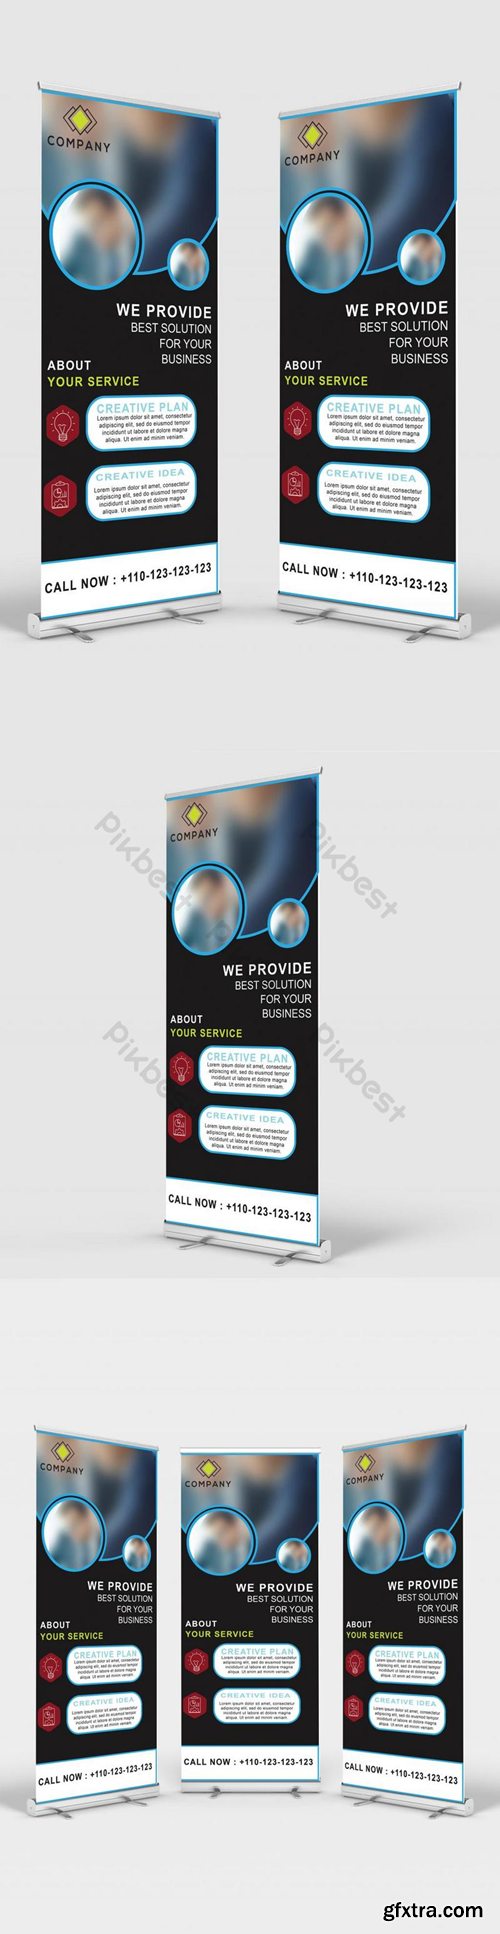 stylish corporate roll up banner Template AI